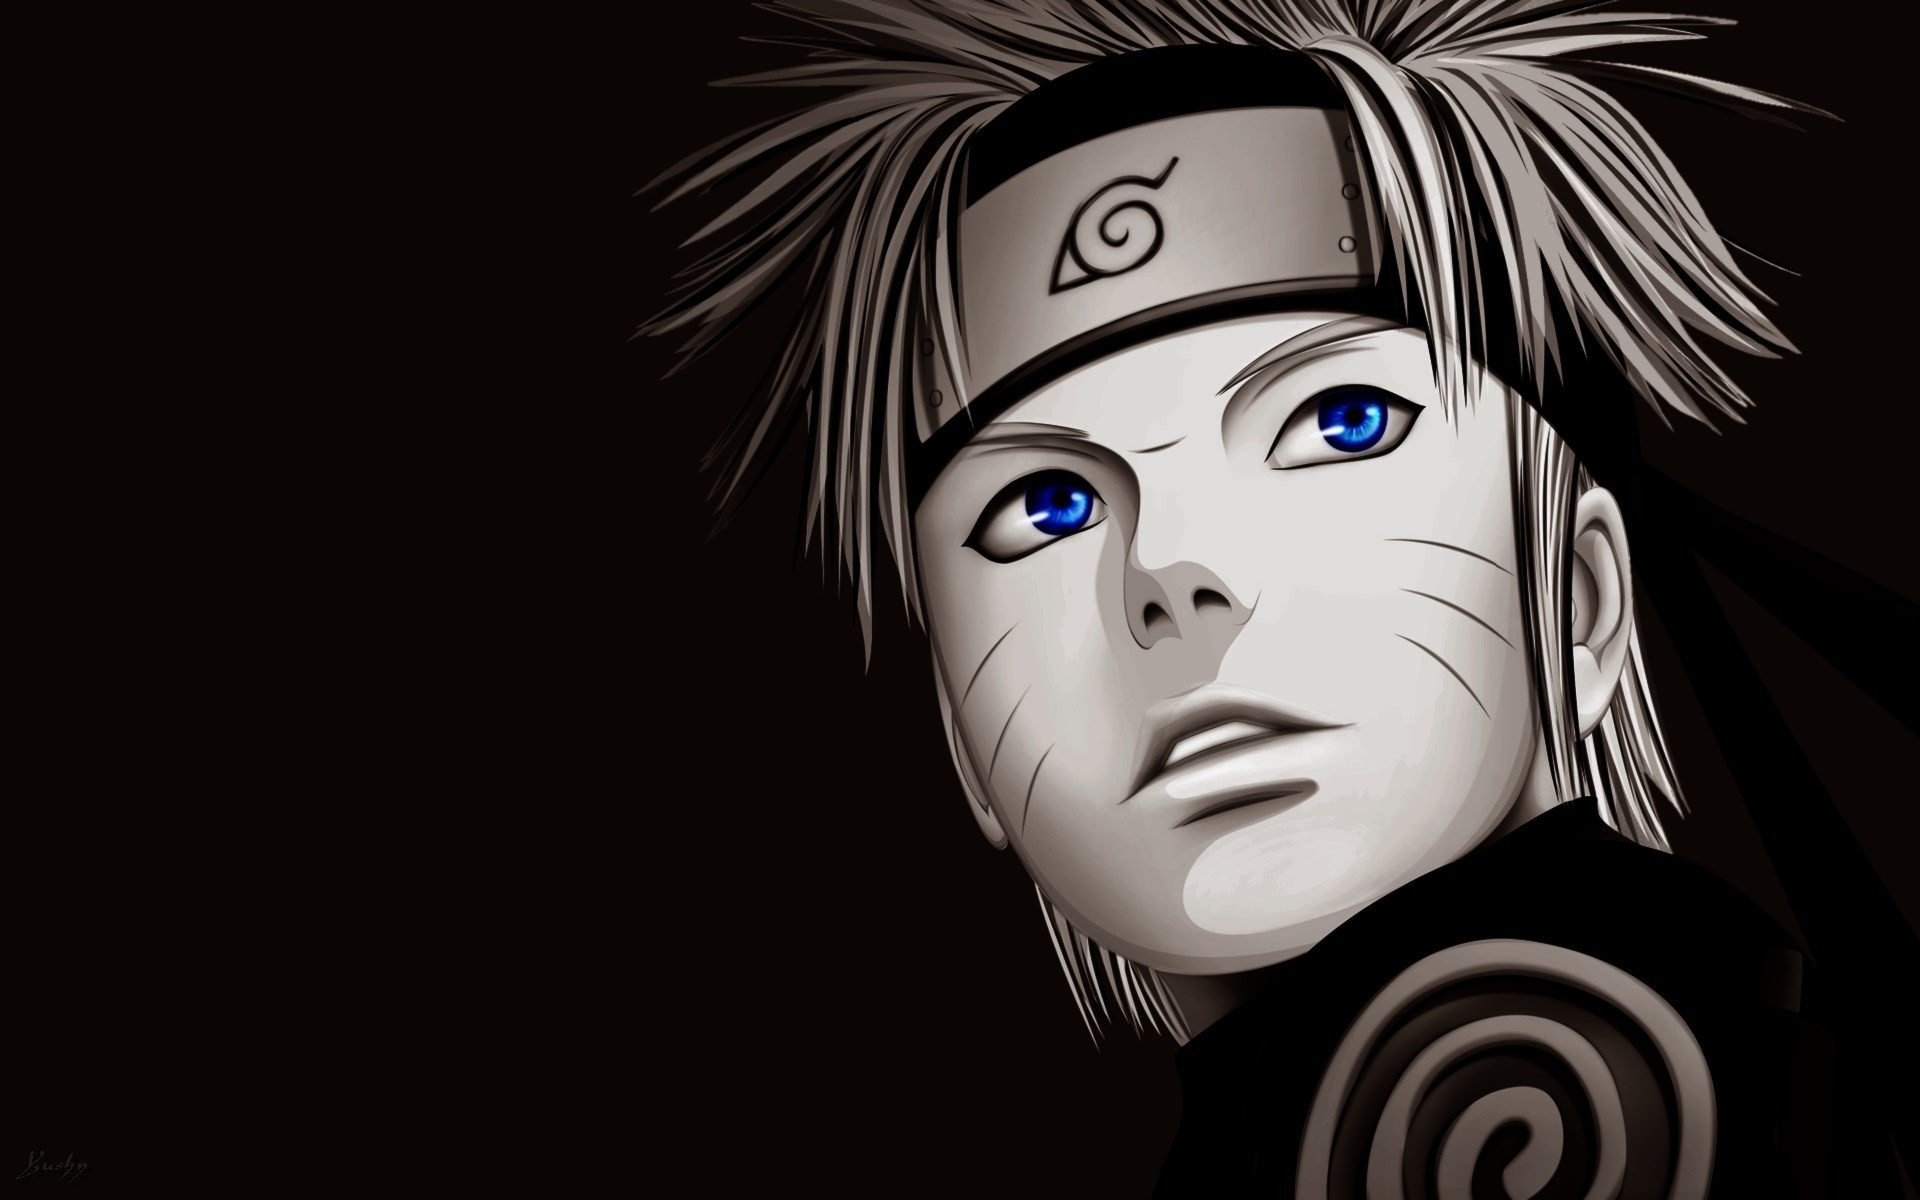 1920x1200 naruto wallpaper hd backgrounds images